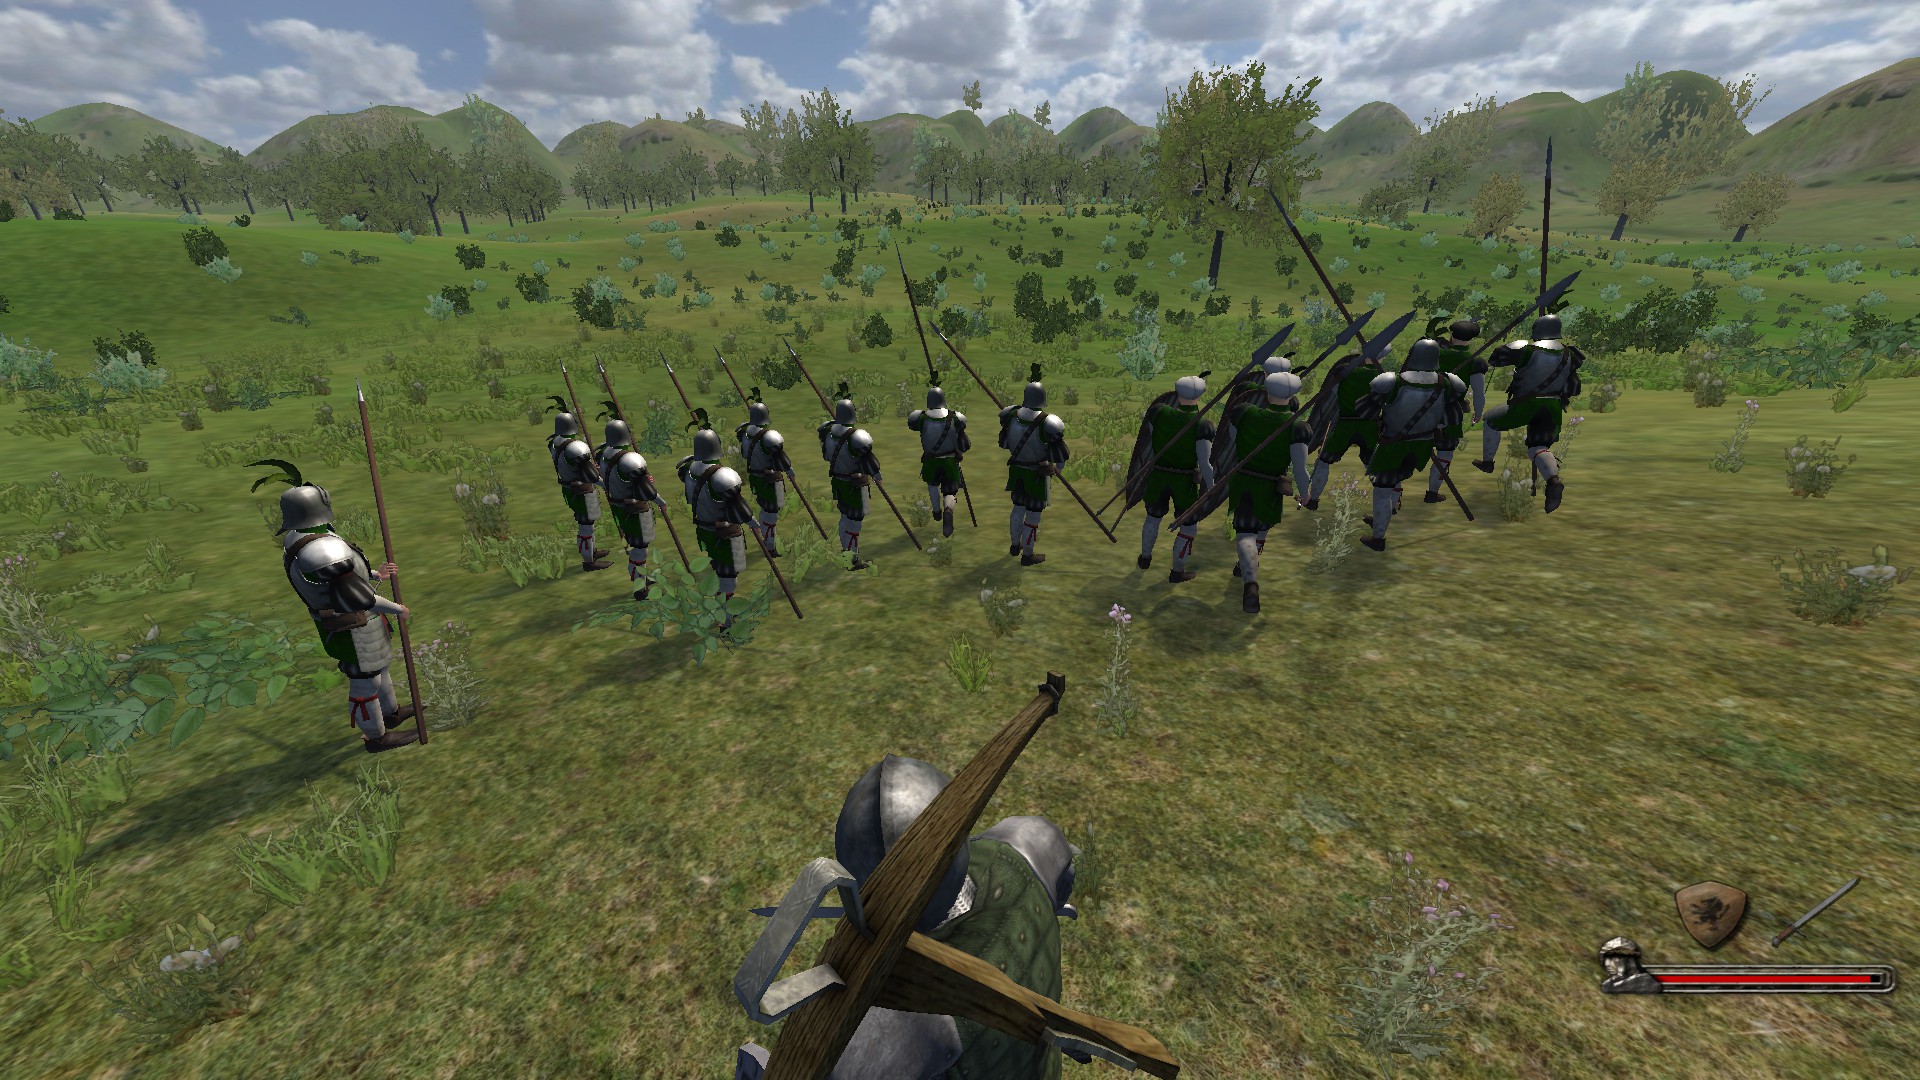 Steam warband. Mount and Blade Warband геймплей. Маунт энд блейд 1. Mount and Blade Warband Скриншоты.